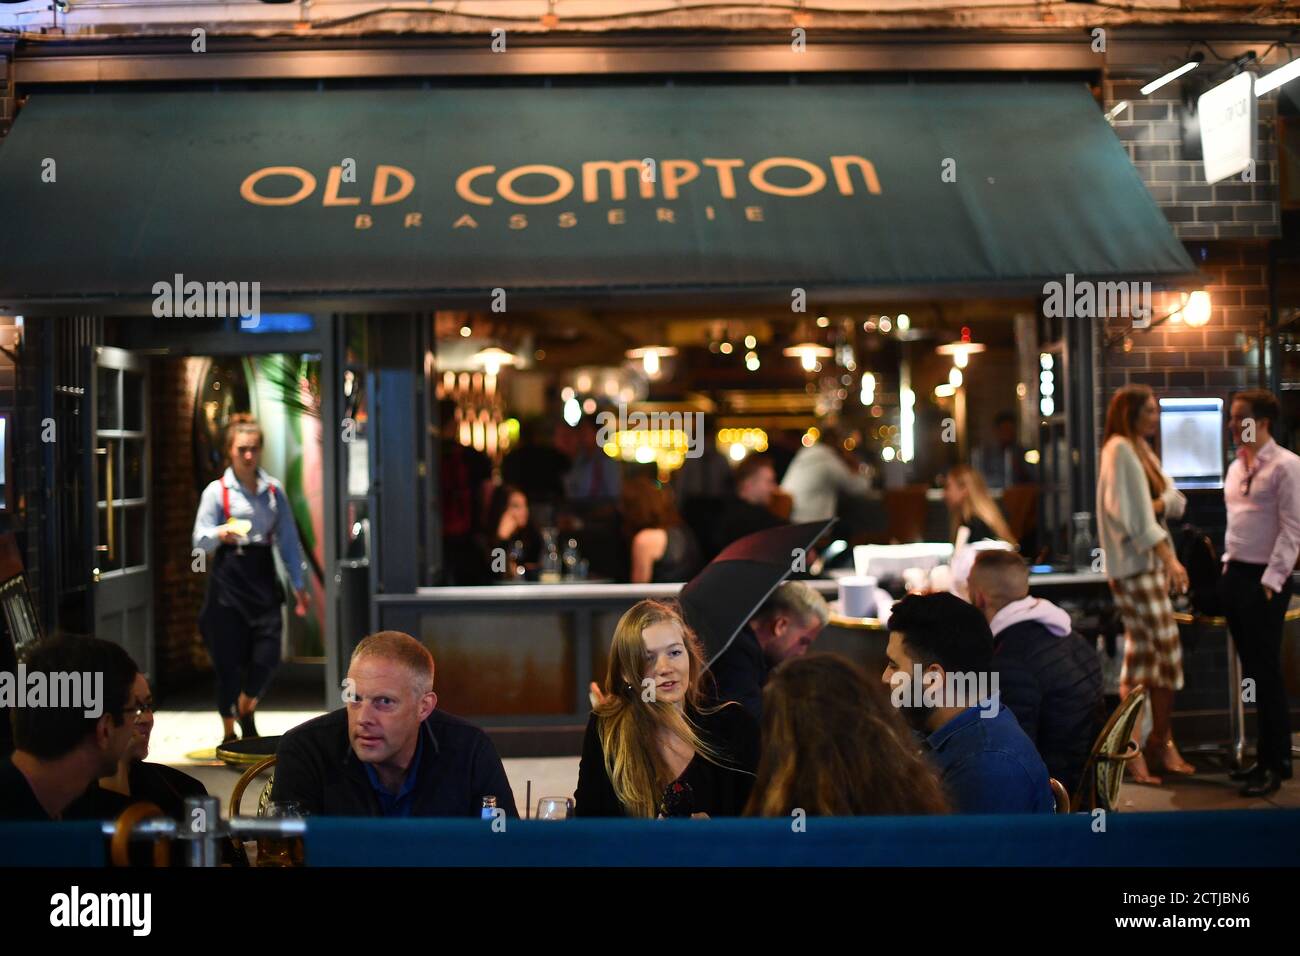 People drinking outside the Old Compton in Soho, London. All pubs, bars, restaurants in England must have a 10pm closing time from Thursday, to help curb the spread of coronavirus. Stock Photo